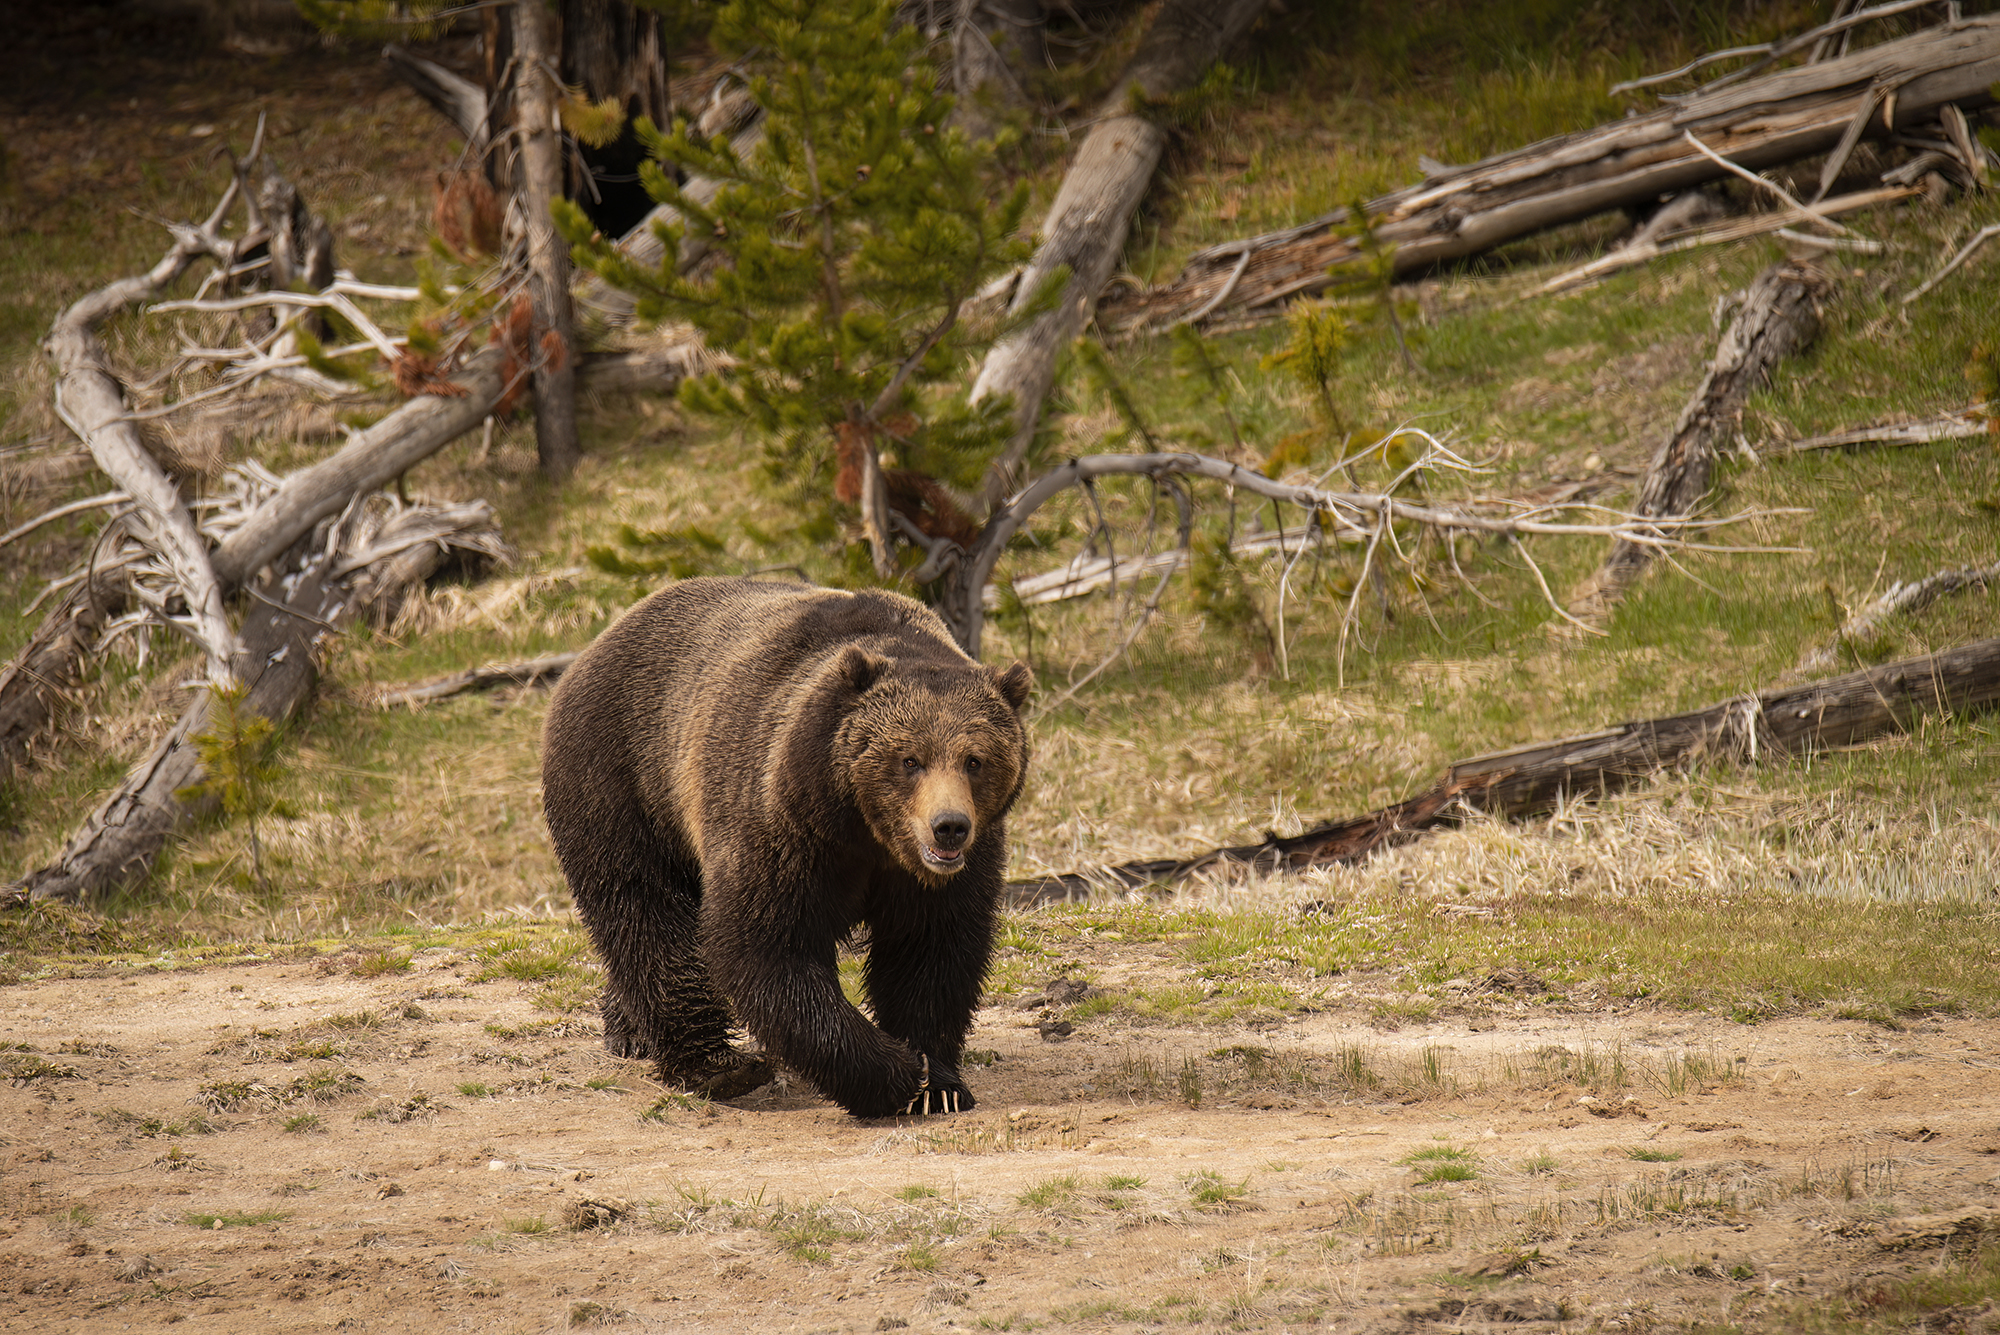 This is the grizzly boar as he pursued the adult female into the meadow.